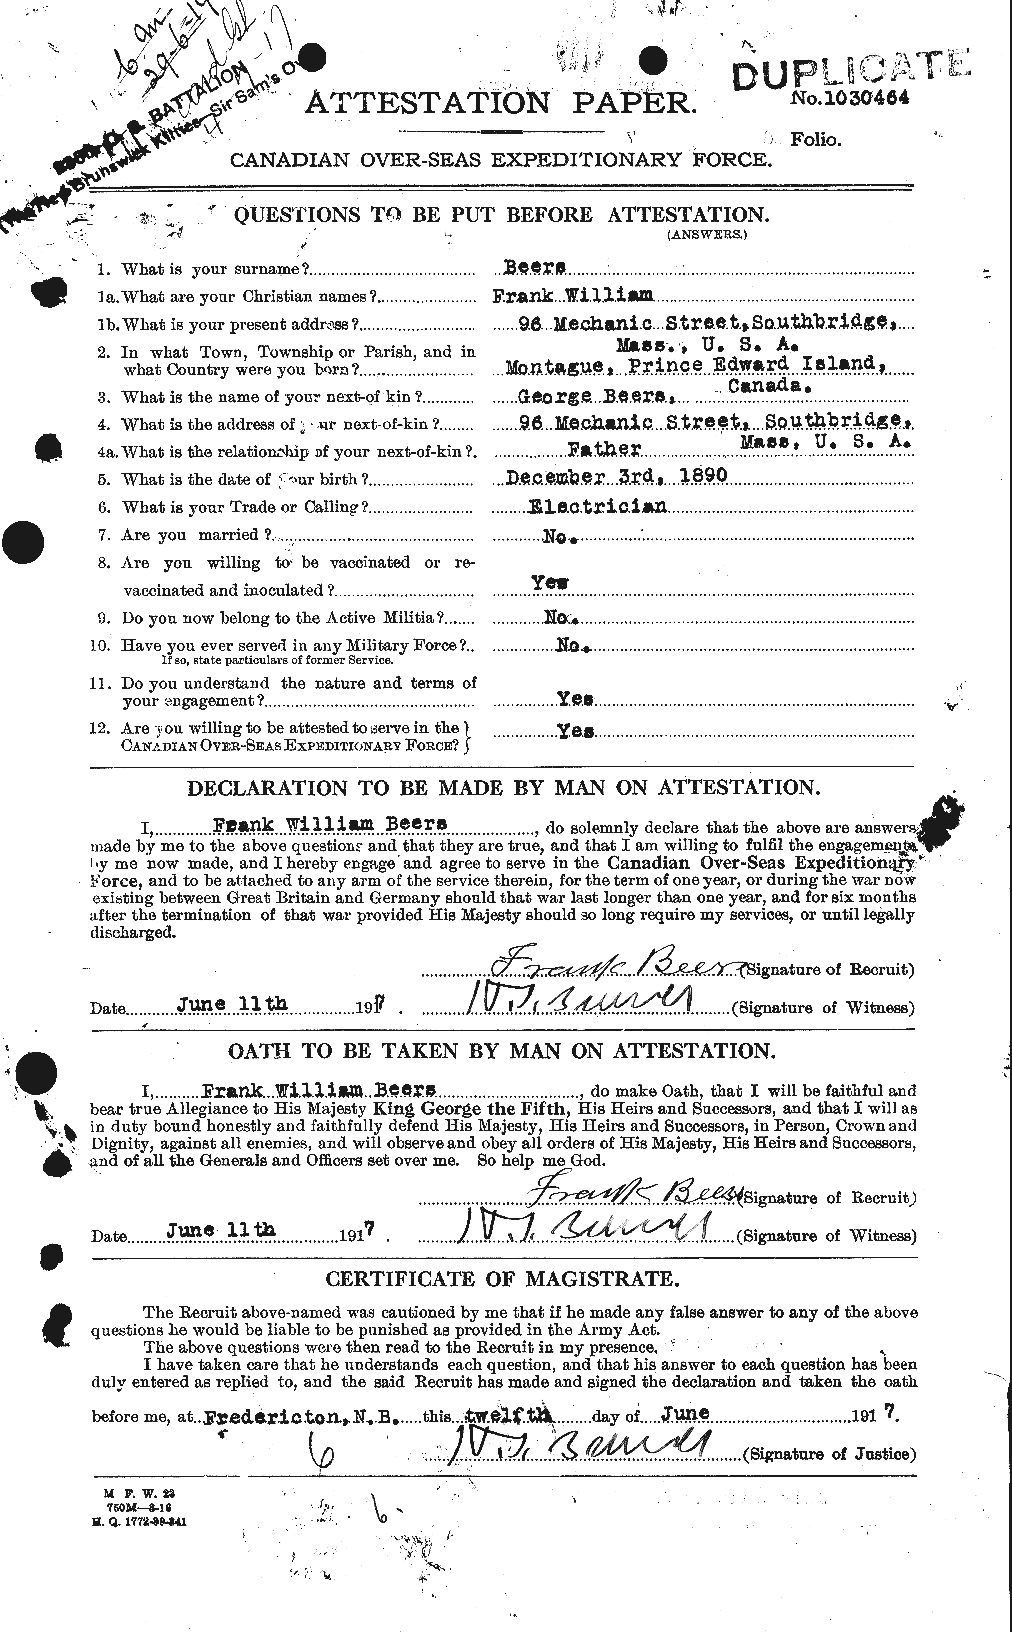 Personnel Records of the First World War - CEF 241597a